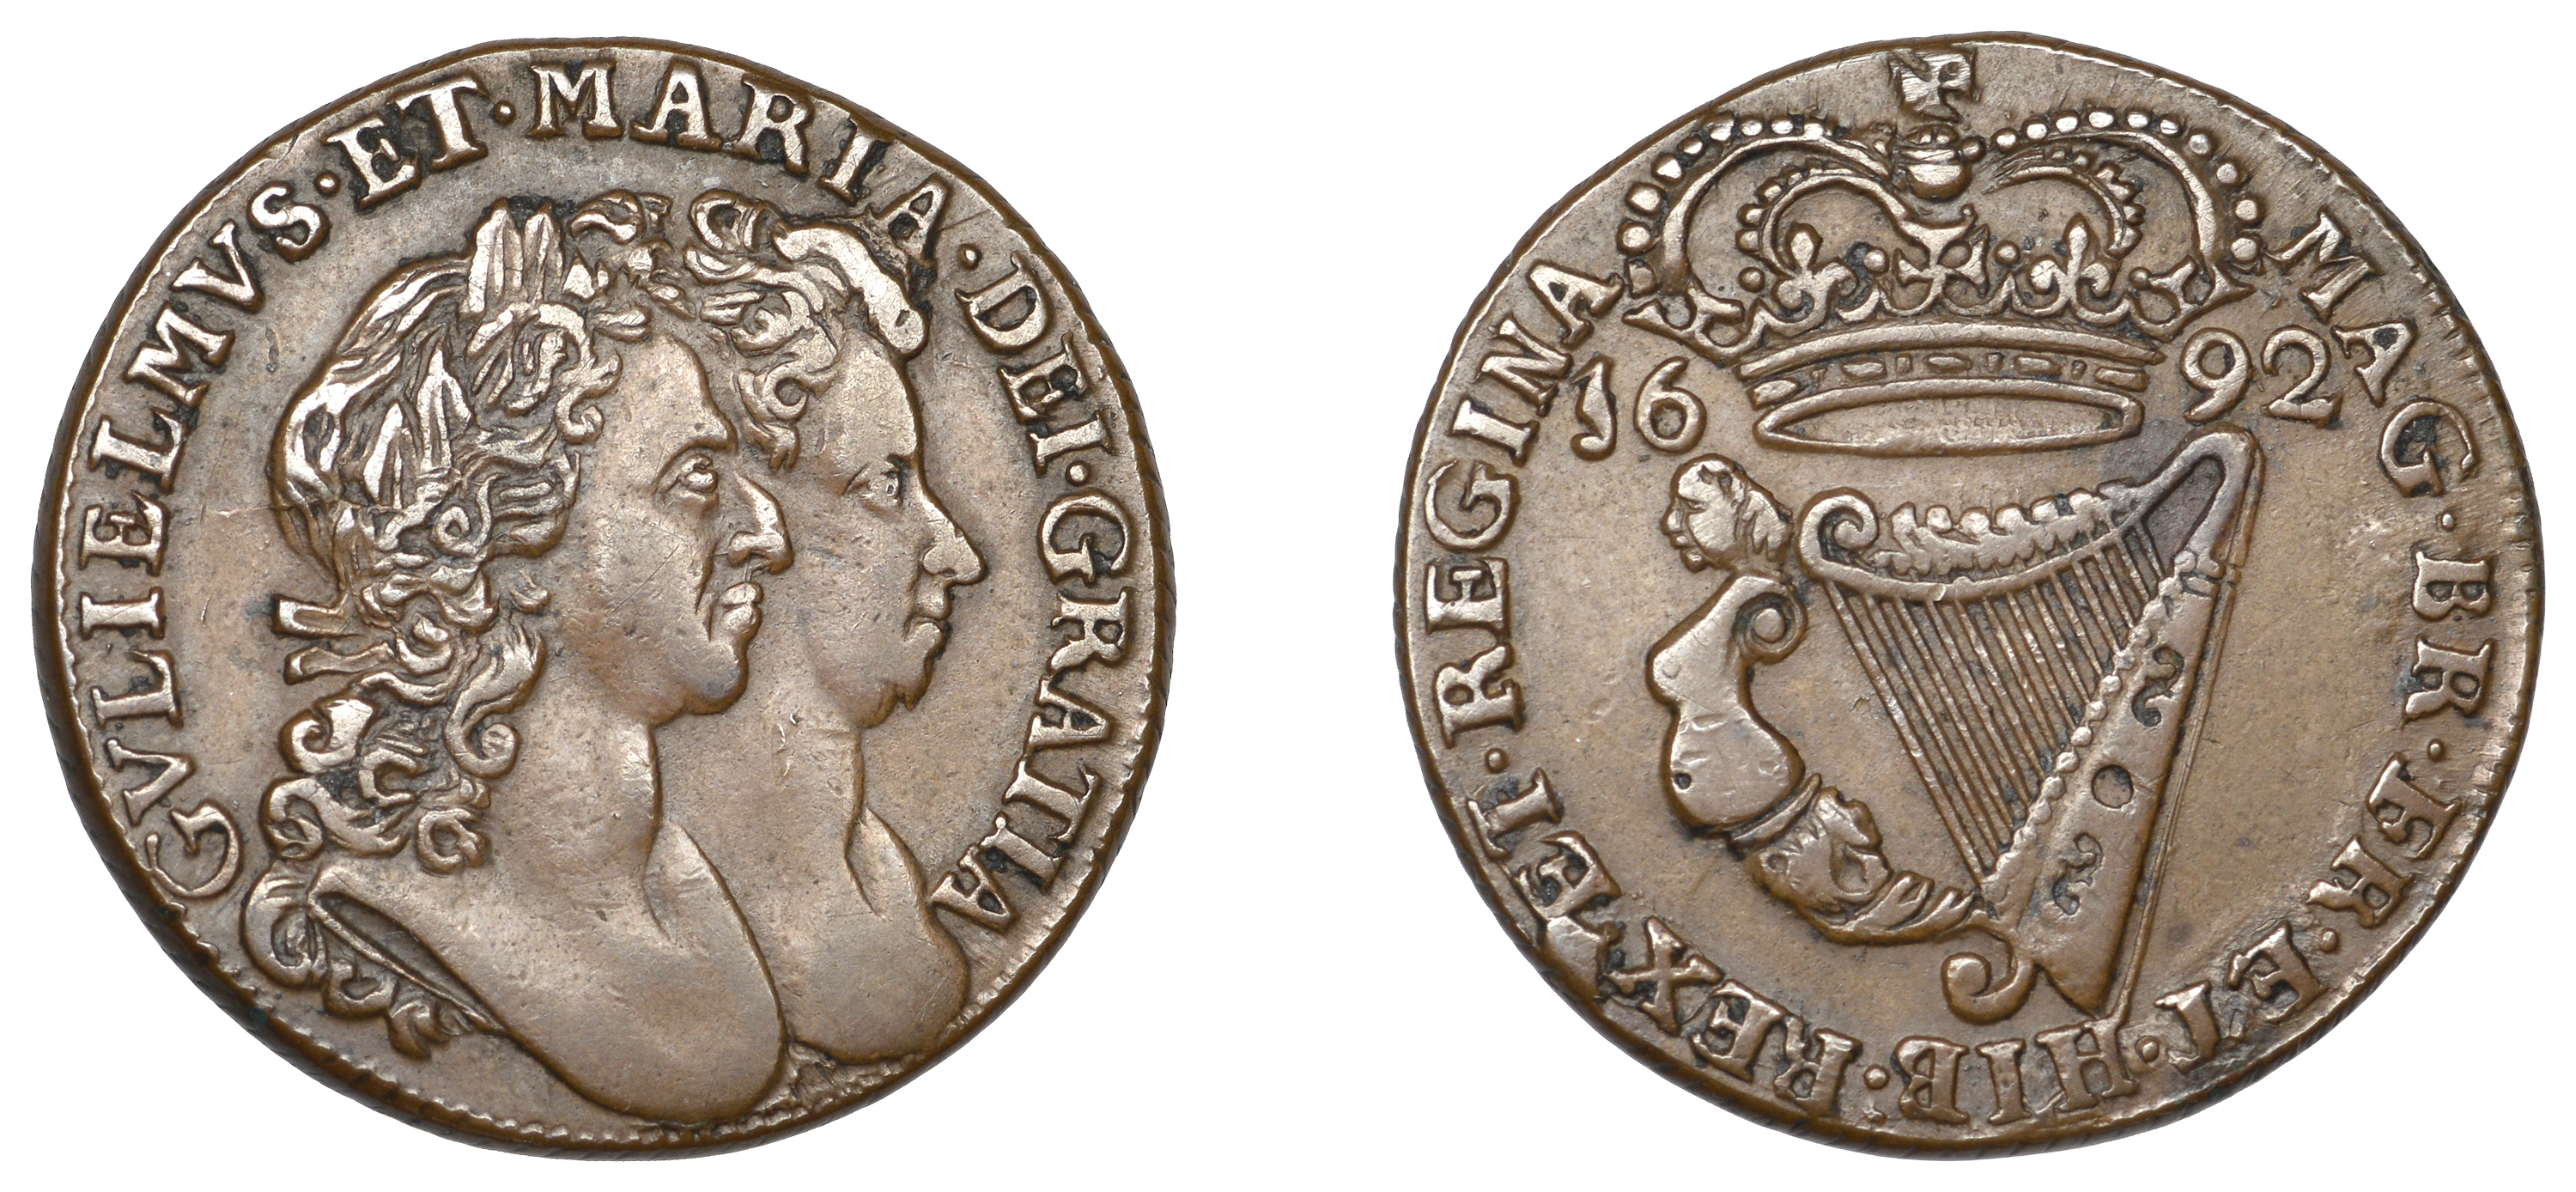 William and Mary (1691-1694), Halfpenny, 1692 (S 6597). About extremely fine, excellent port...